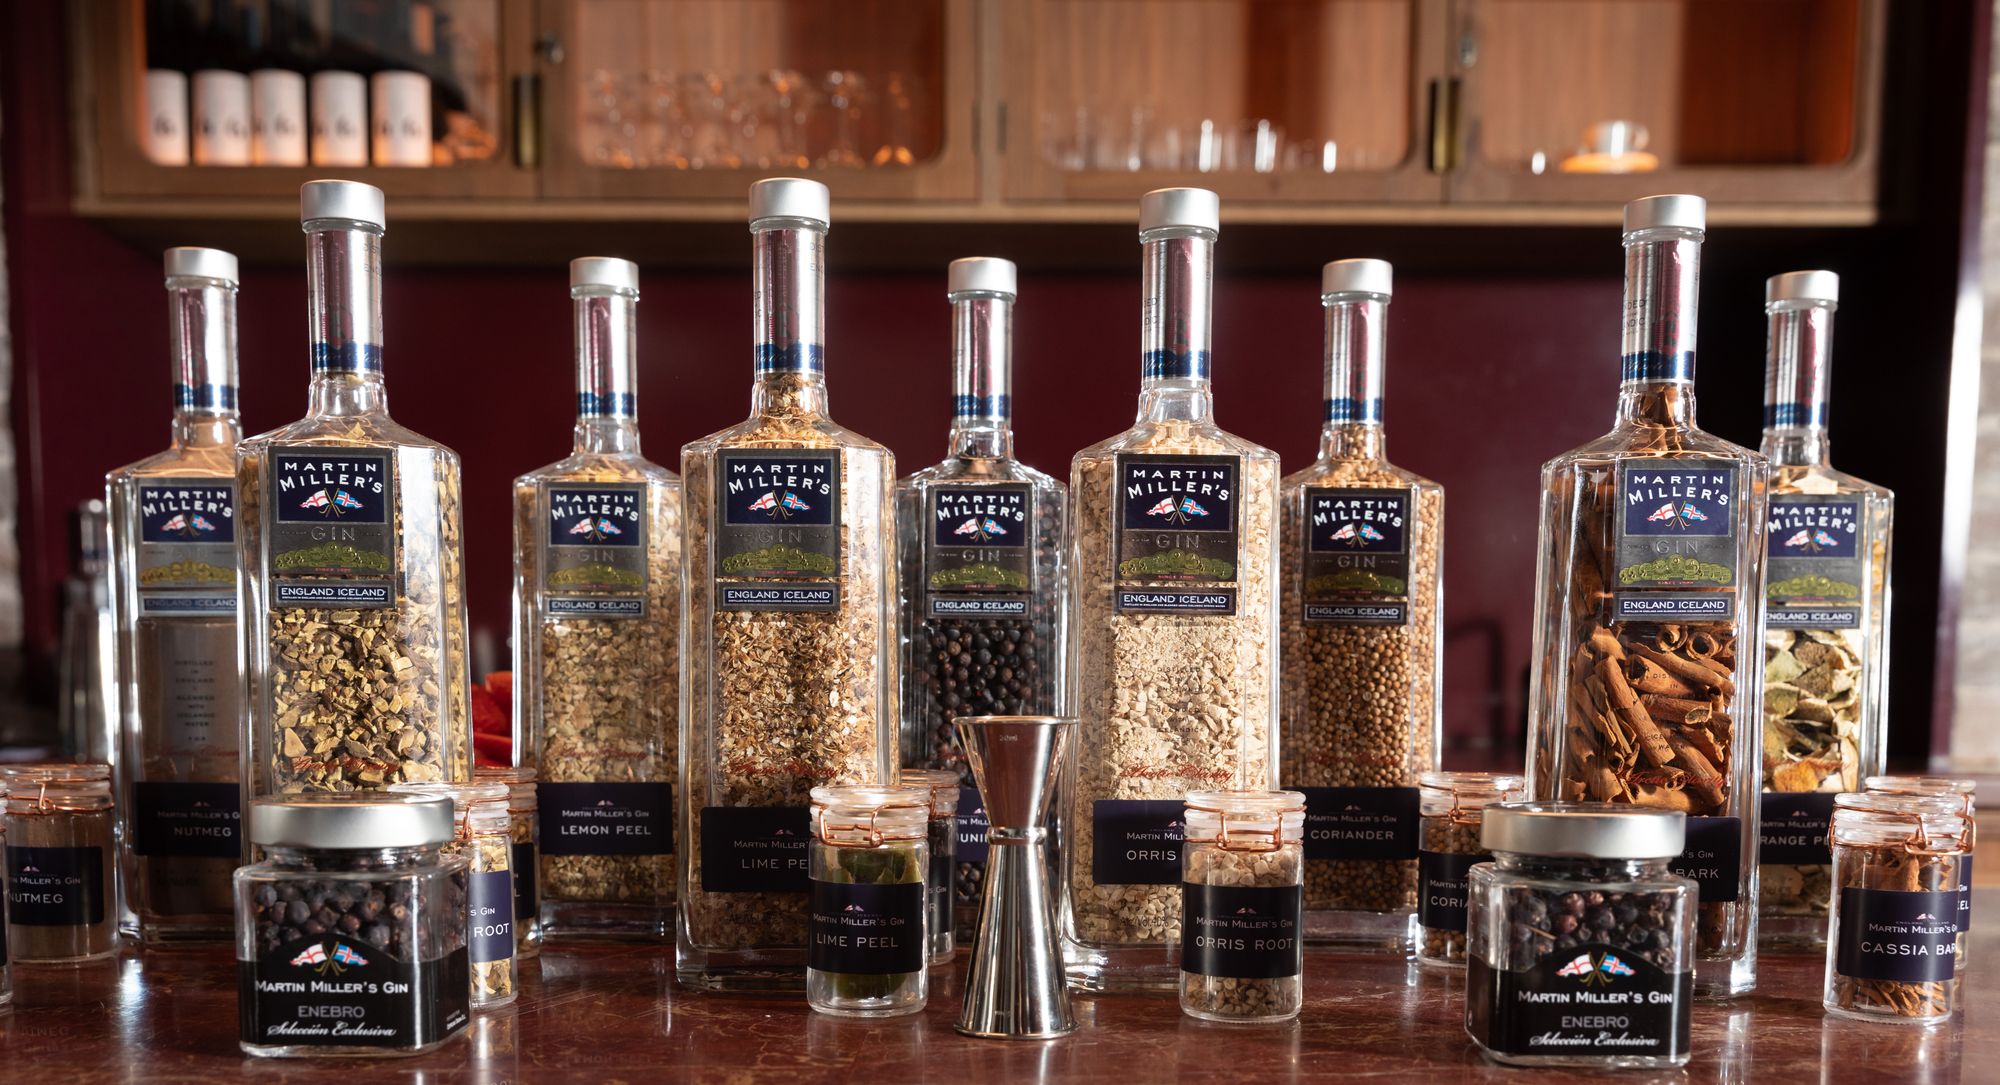 The botanicals of Martin Miller's Gin. Photo: Supplied